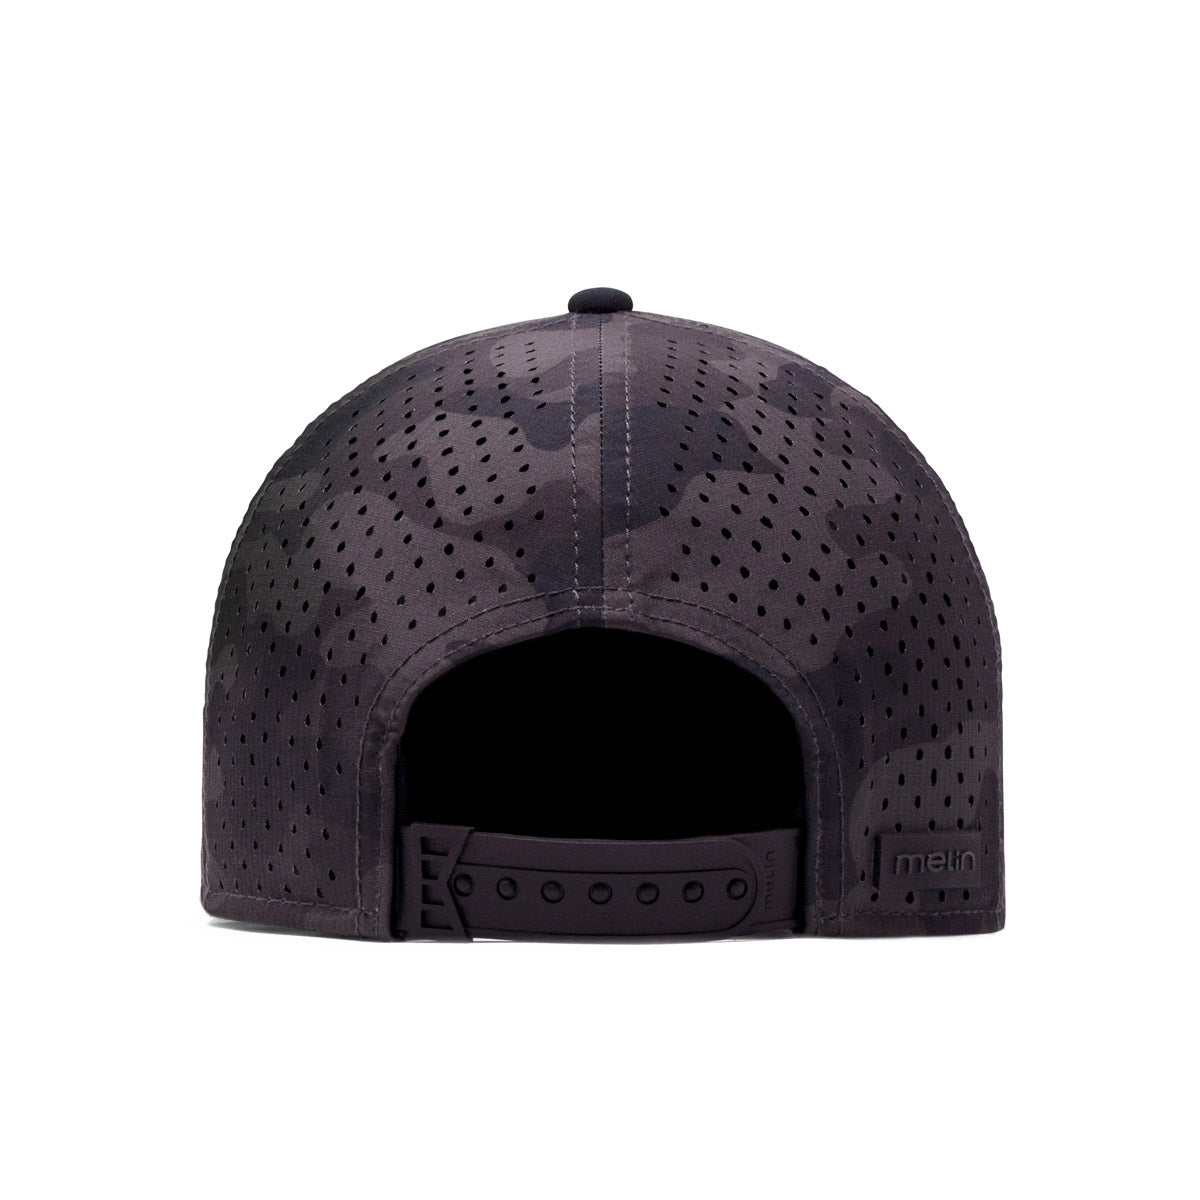 Melin: Hydro A-Game Performace Snapback Hat - BCMO